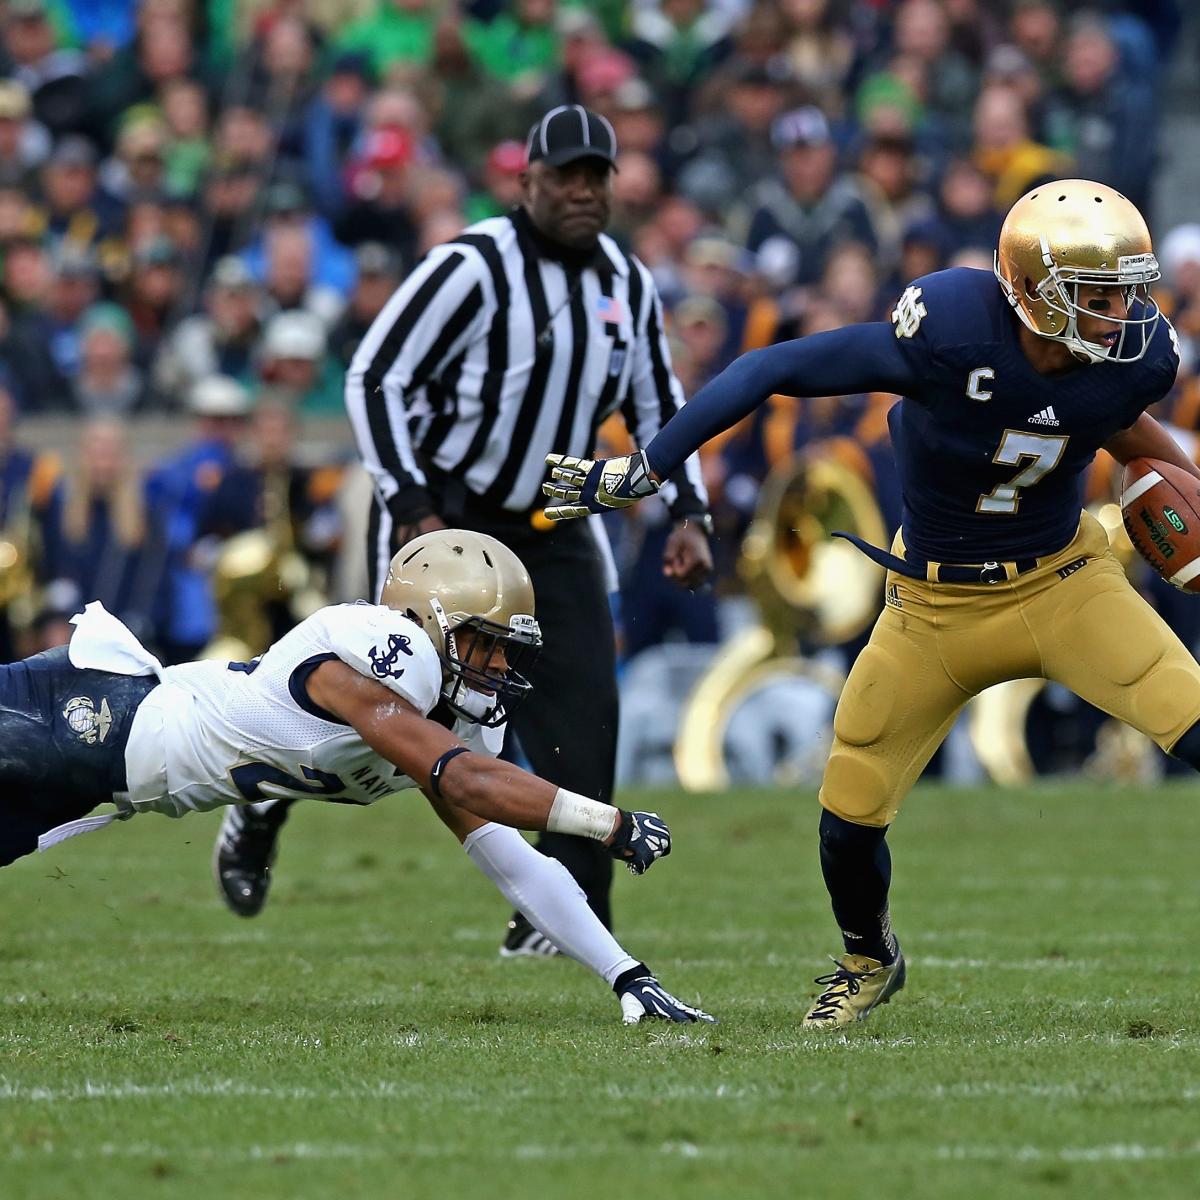 Notre Dame vs. Pitt Live Game Grades and Analysis for the Irish News